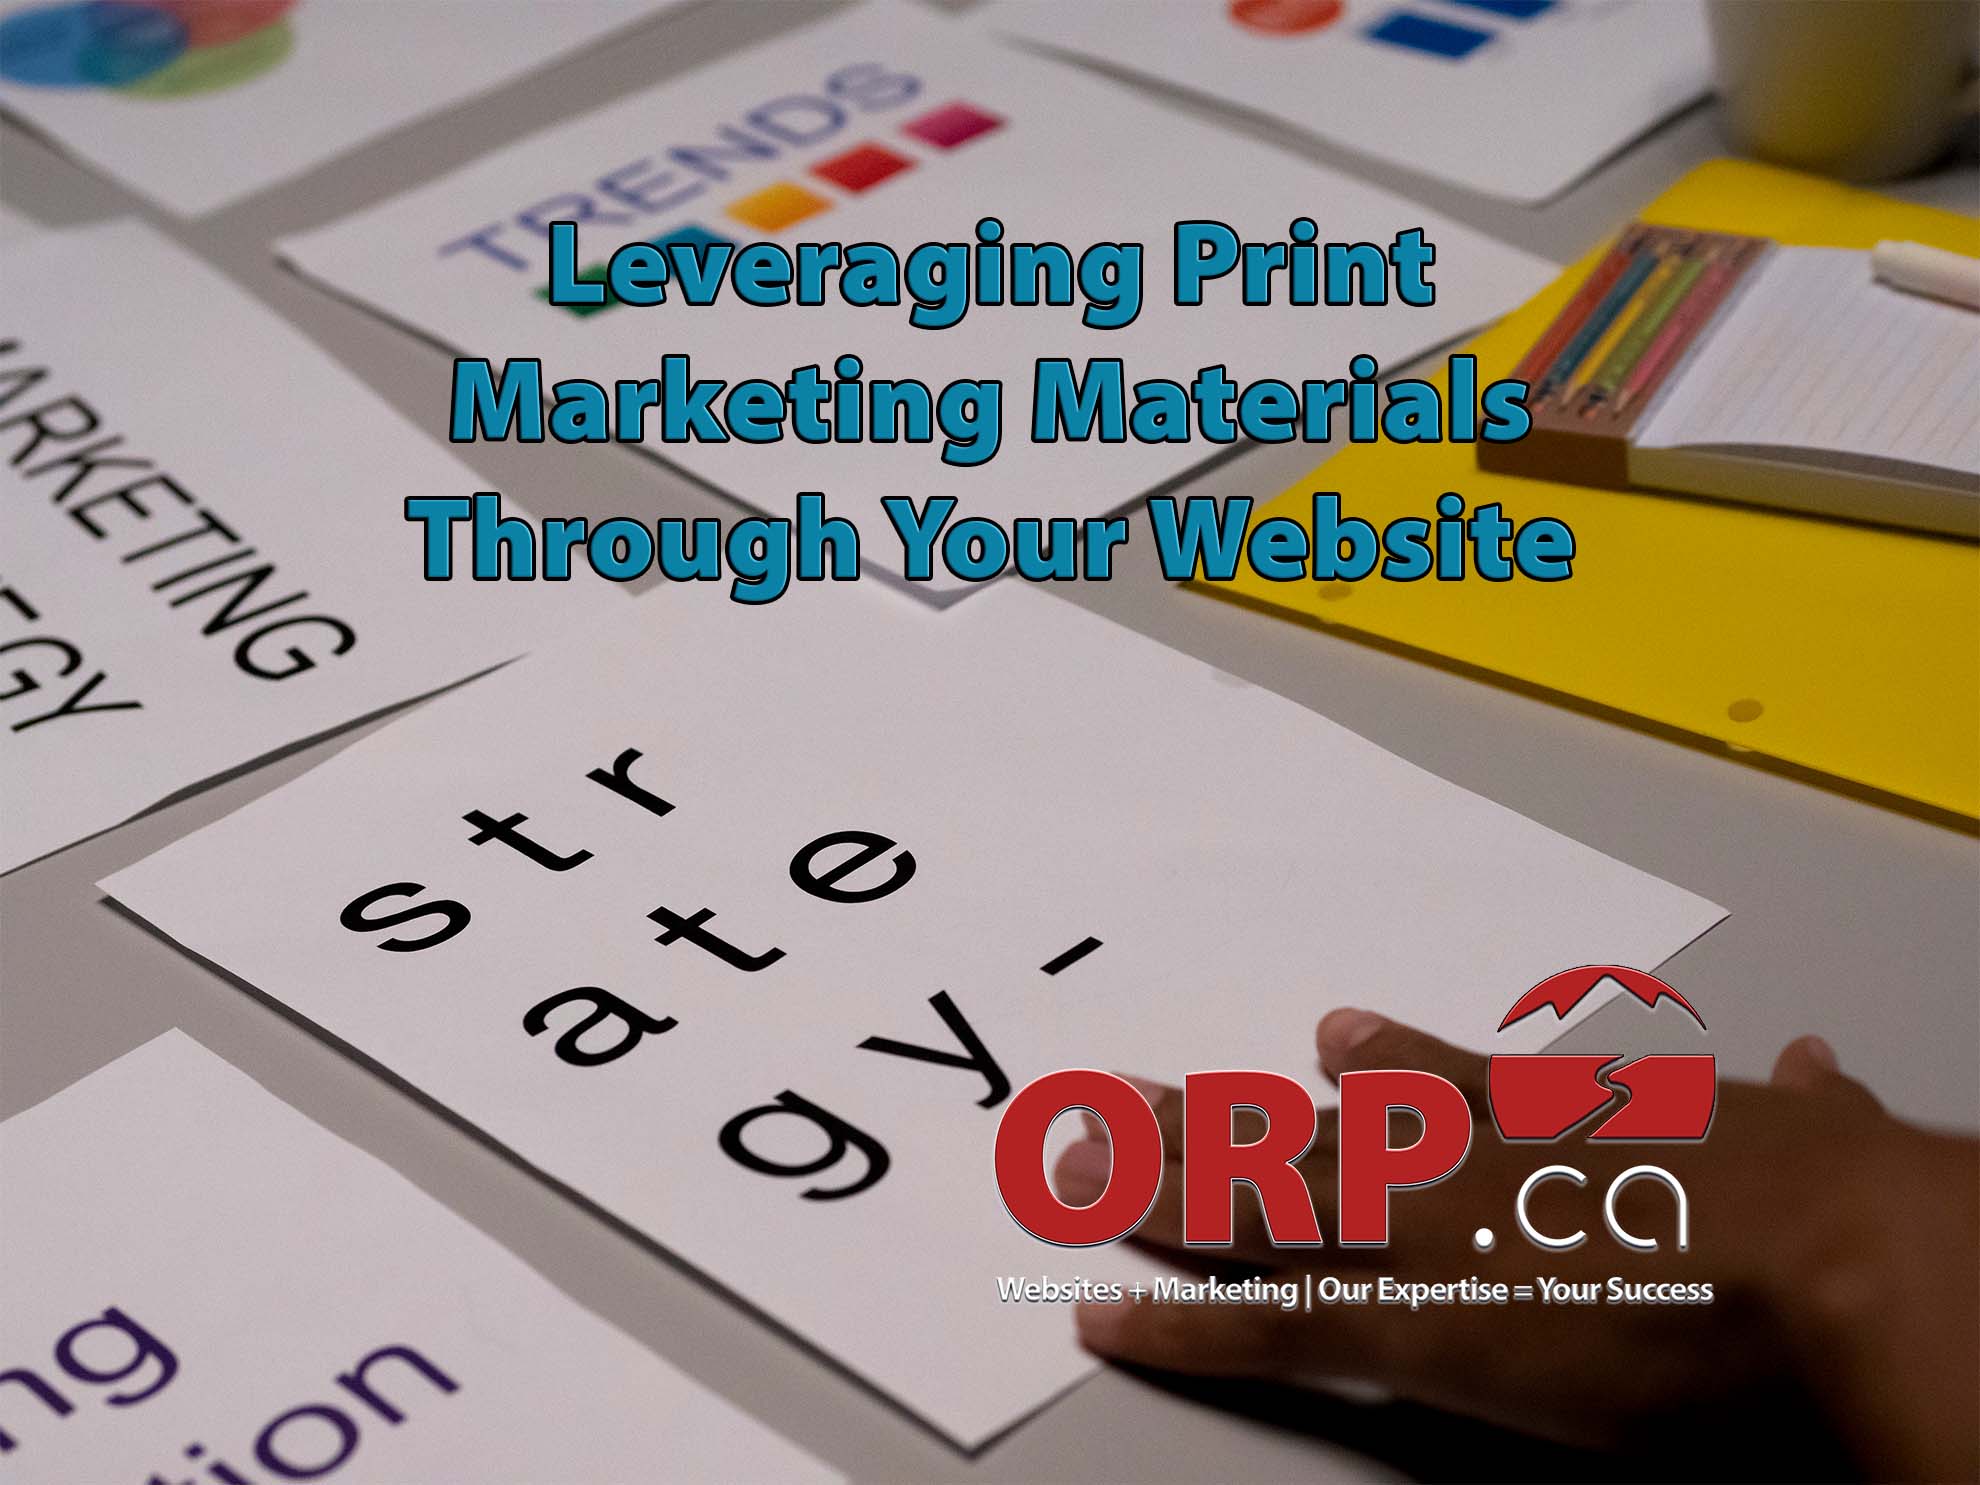 Leveraging Print Marketing Materials Through Your Website a small business digital marketing article from ORP.ca - Website design and support, digital marketing and consulting services.